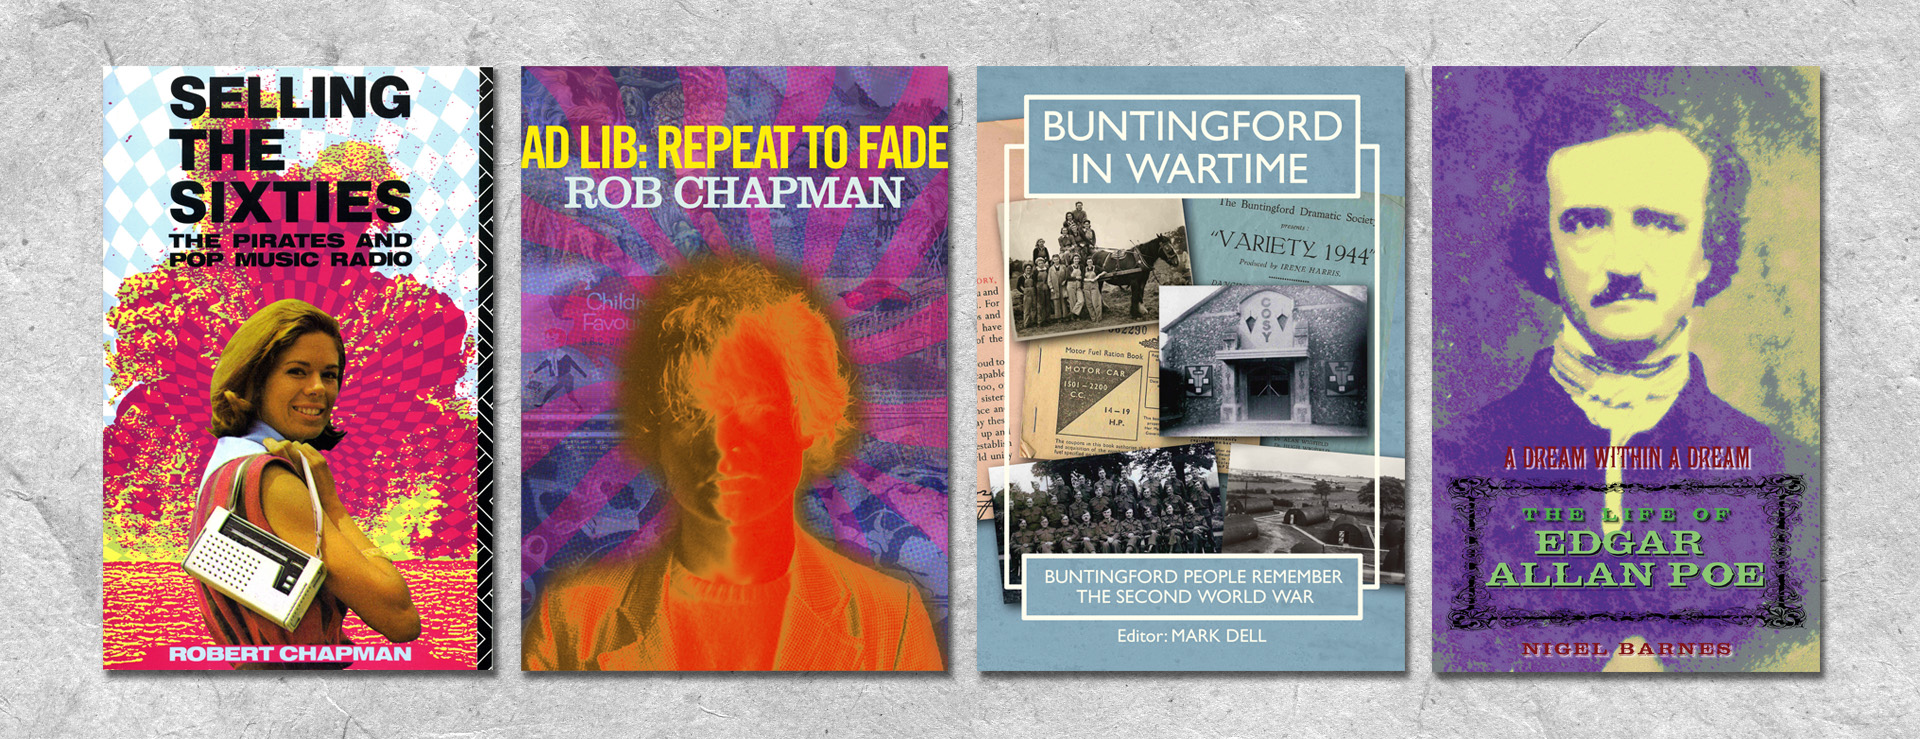 Selling the Sixties, Buntingford in Wartime, The Life of Edgard Allan Poe